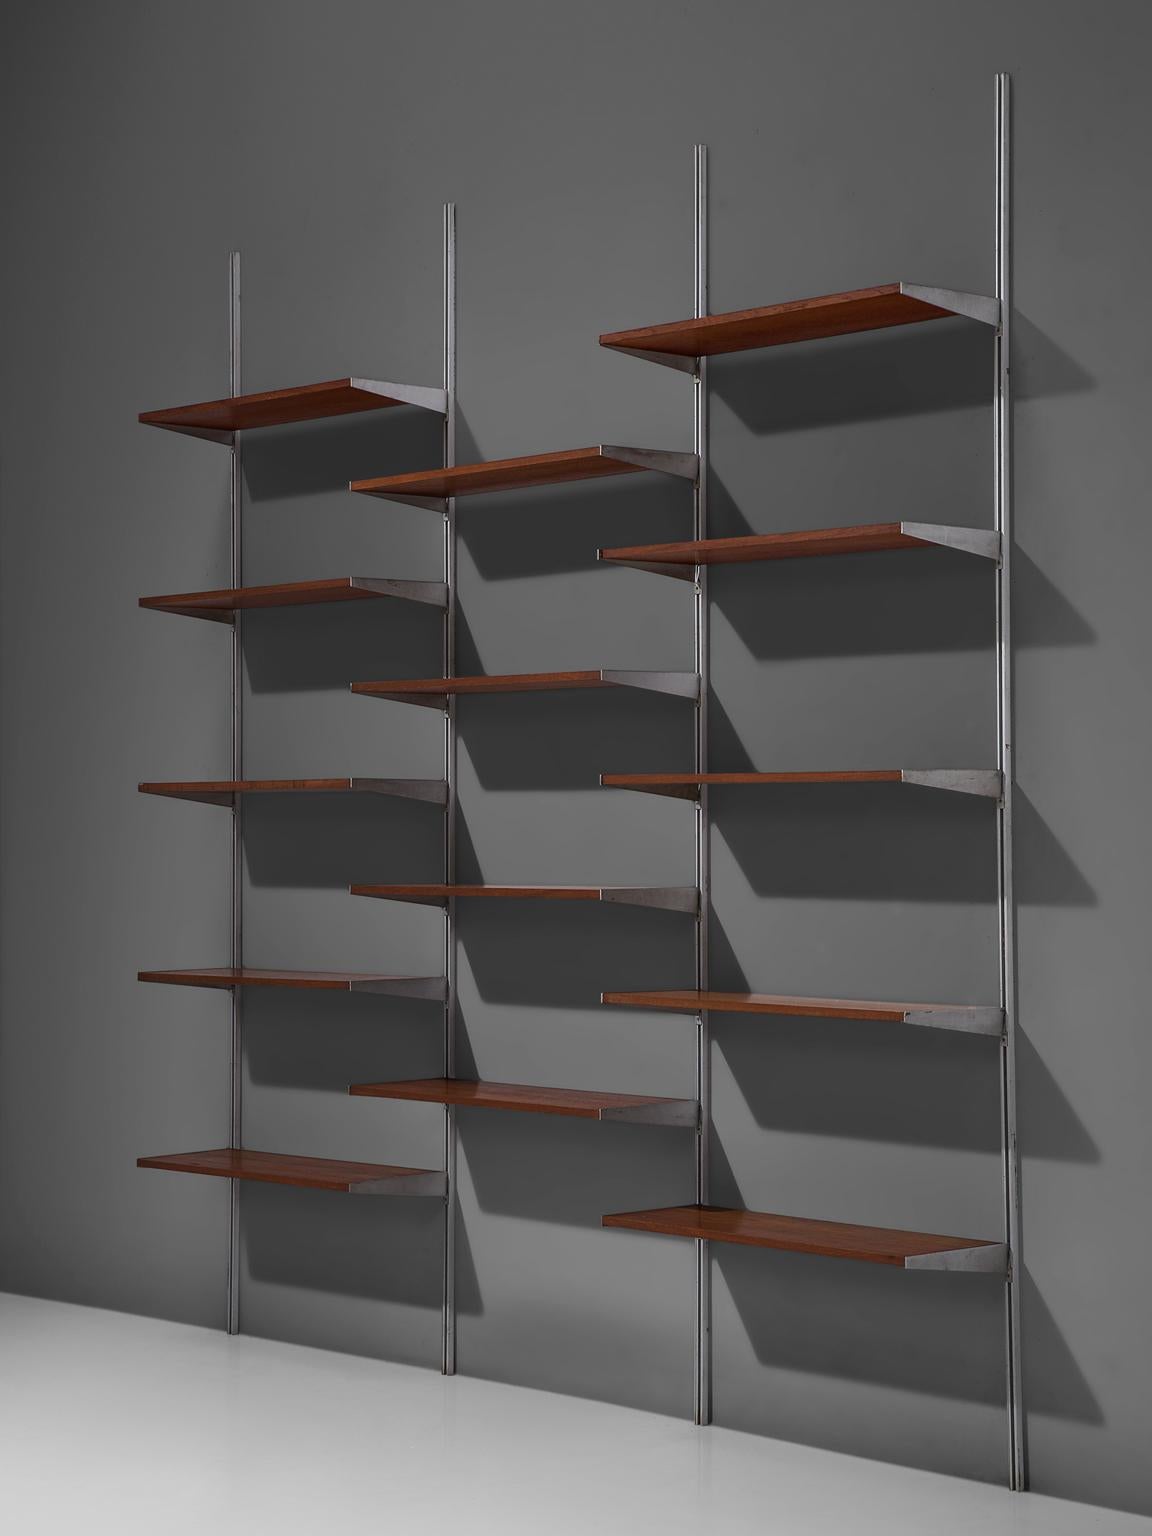 George Nelson for Herman Miller, 'Comprehensive Storage System (CSS)' wall unit, steel and aluminum, walnut, United States, 1960s

This storage system is designed by Nelson in the 60s. The wall unit was the first piece of furniture by Miller that